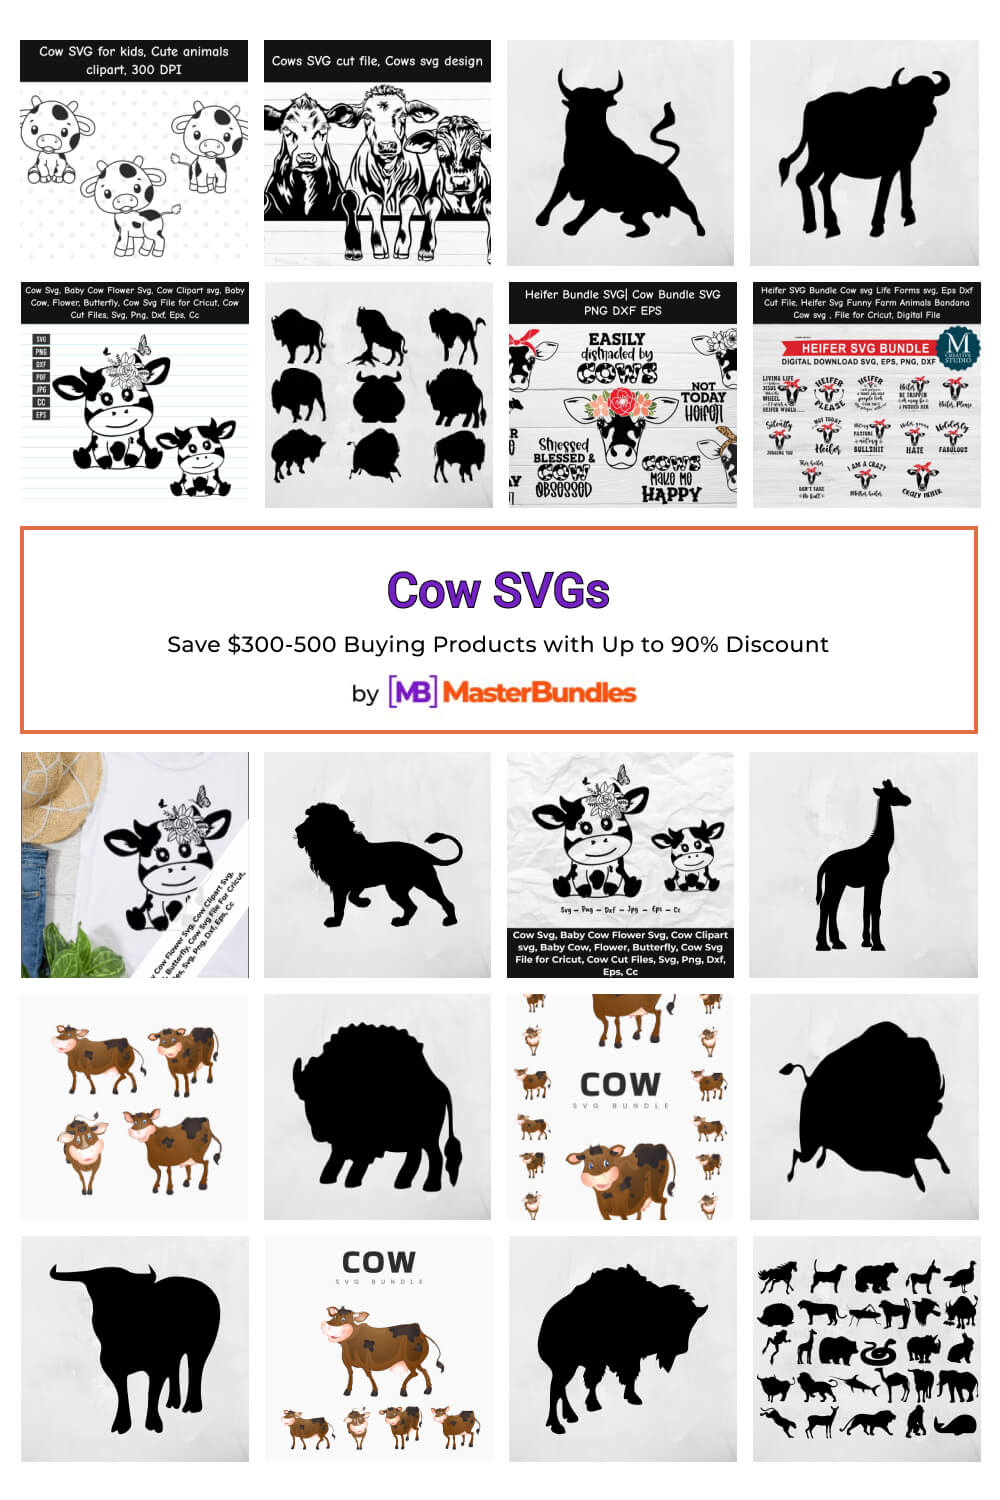 cow svgs pinterest image.